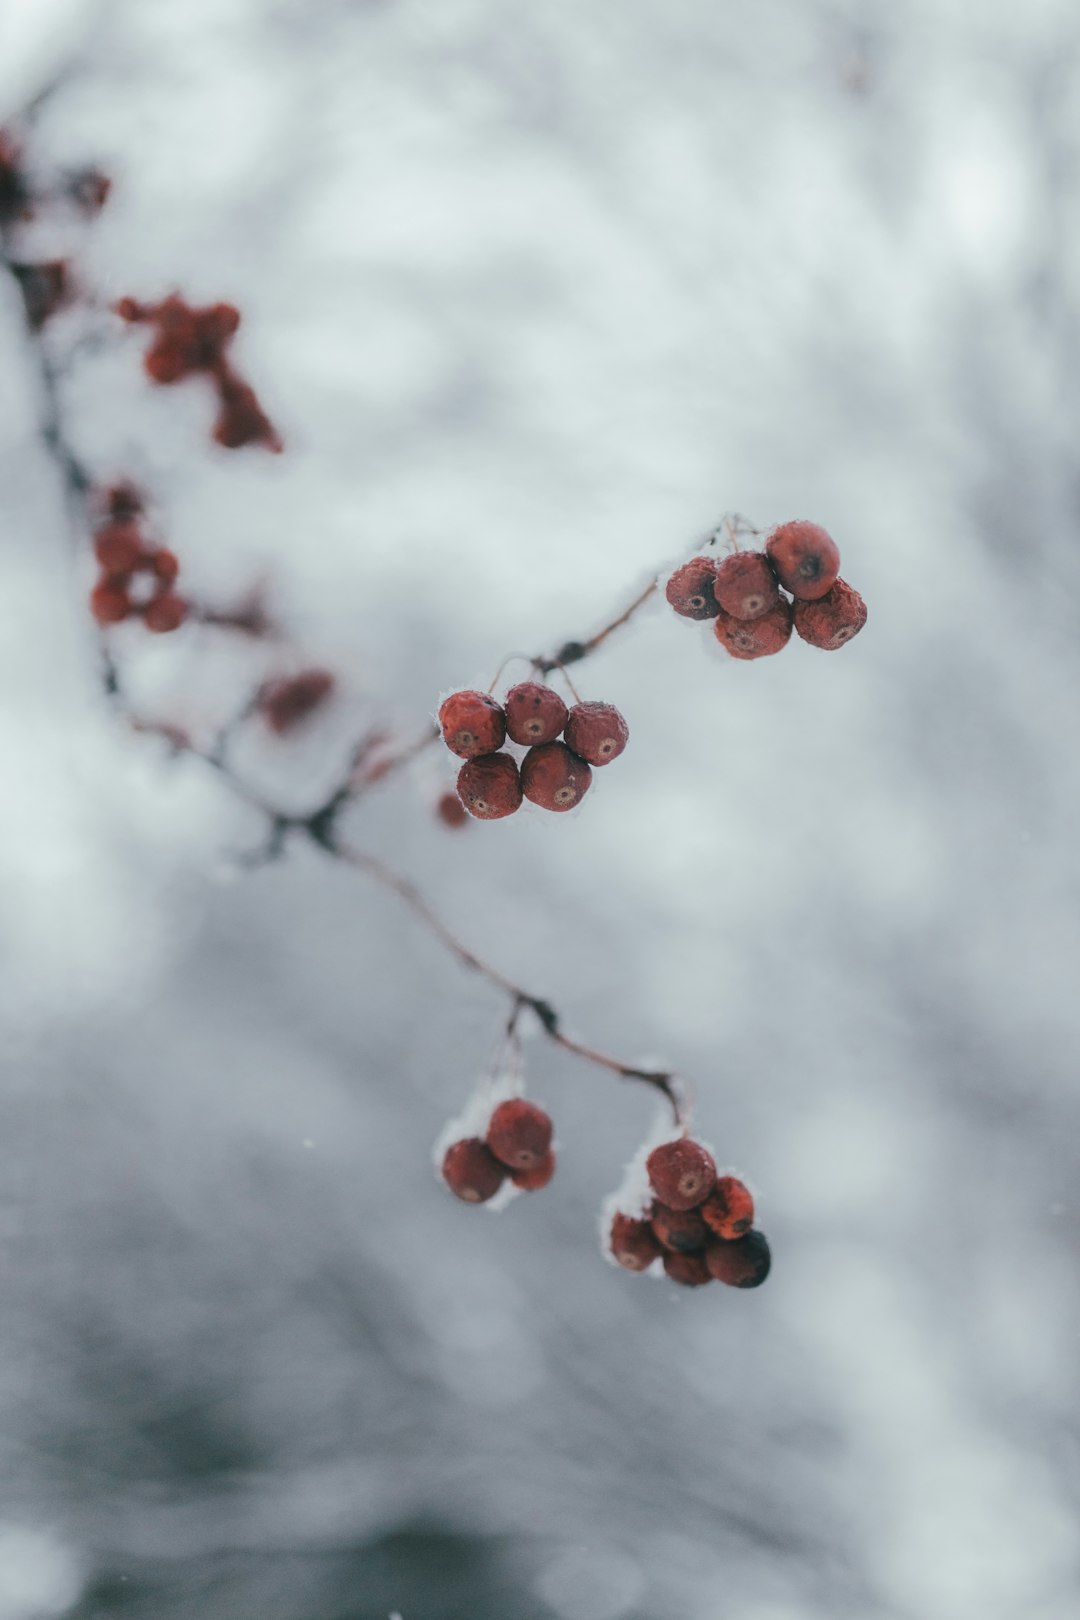 red round fruits on tree branch under white clouds